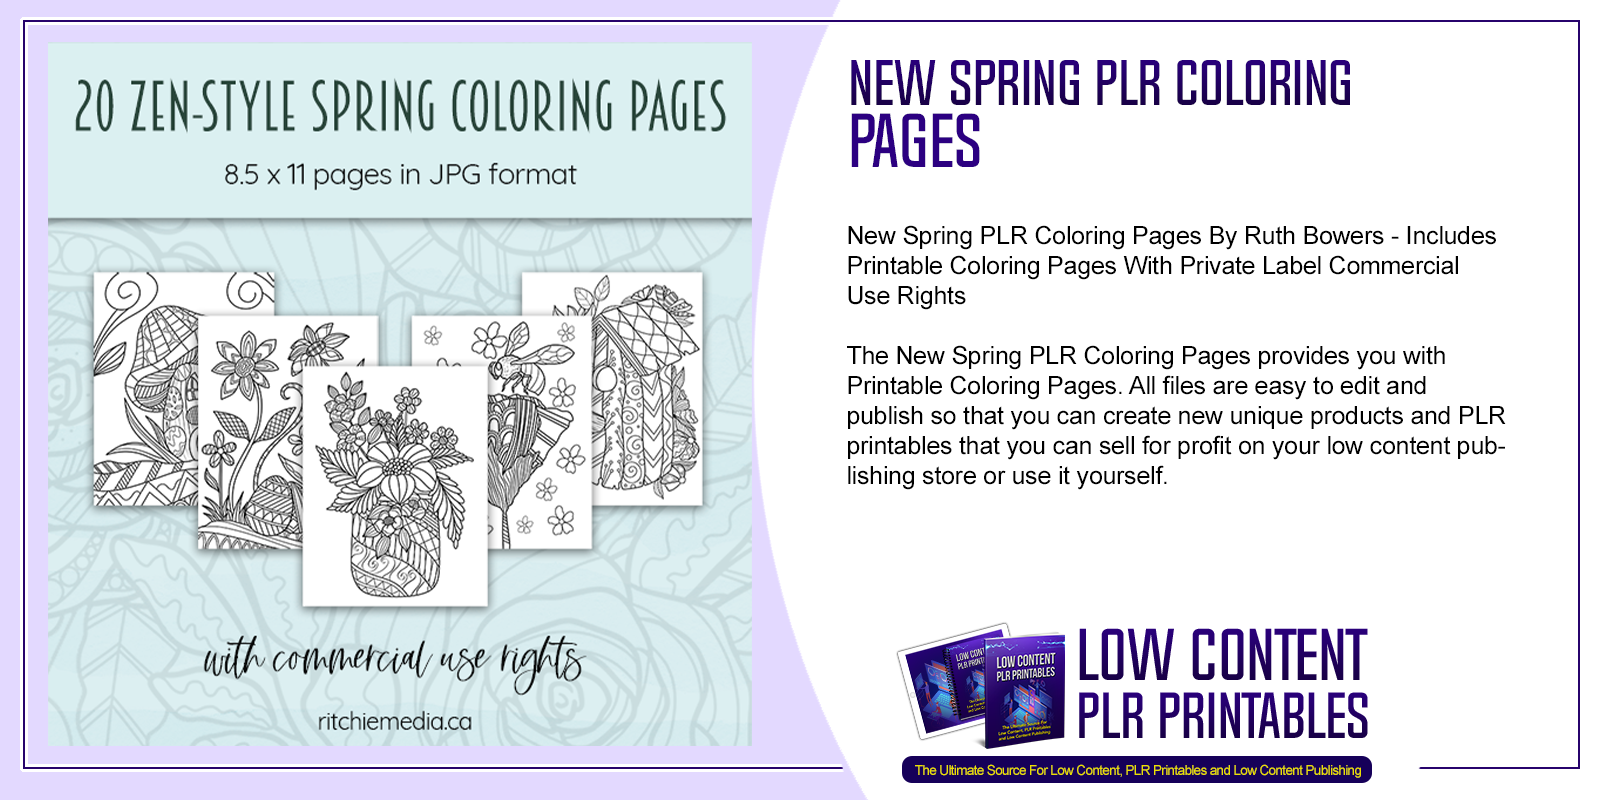 New Spring PLR Coloring Pages